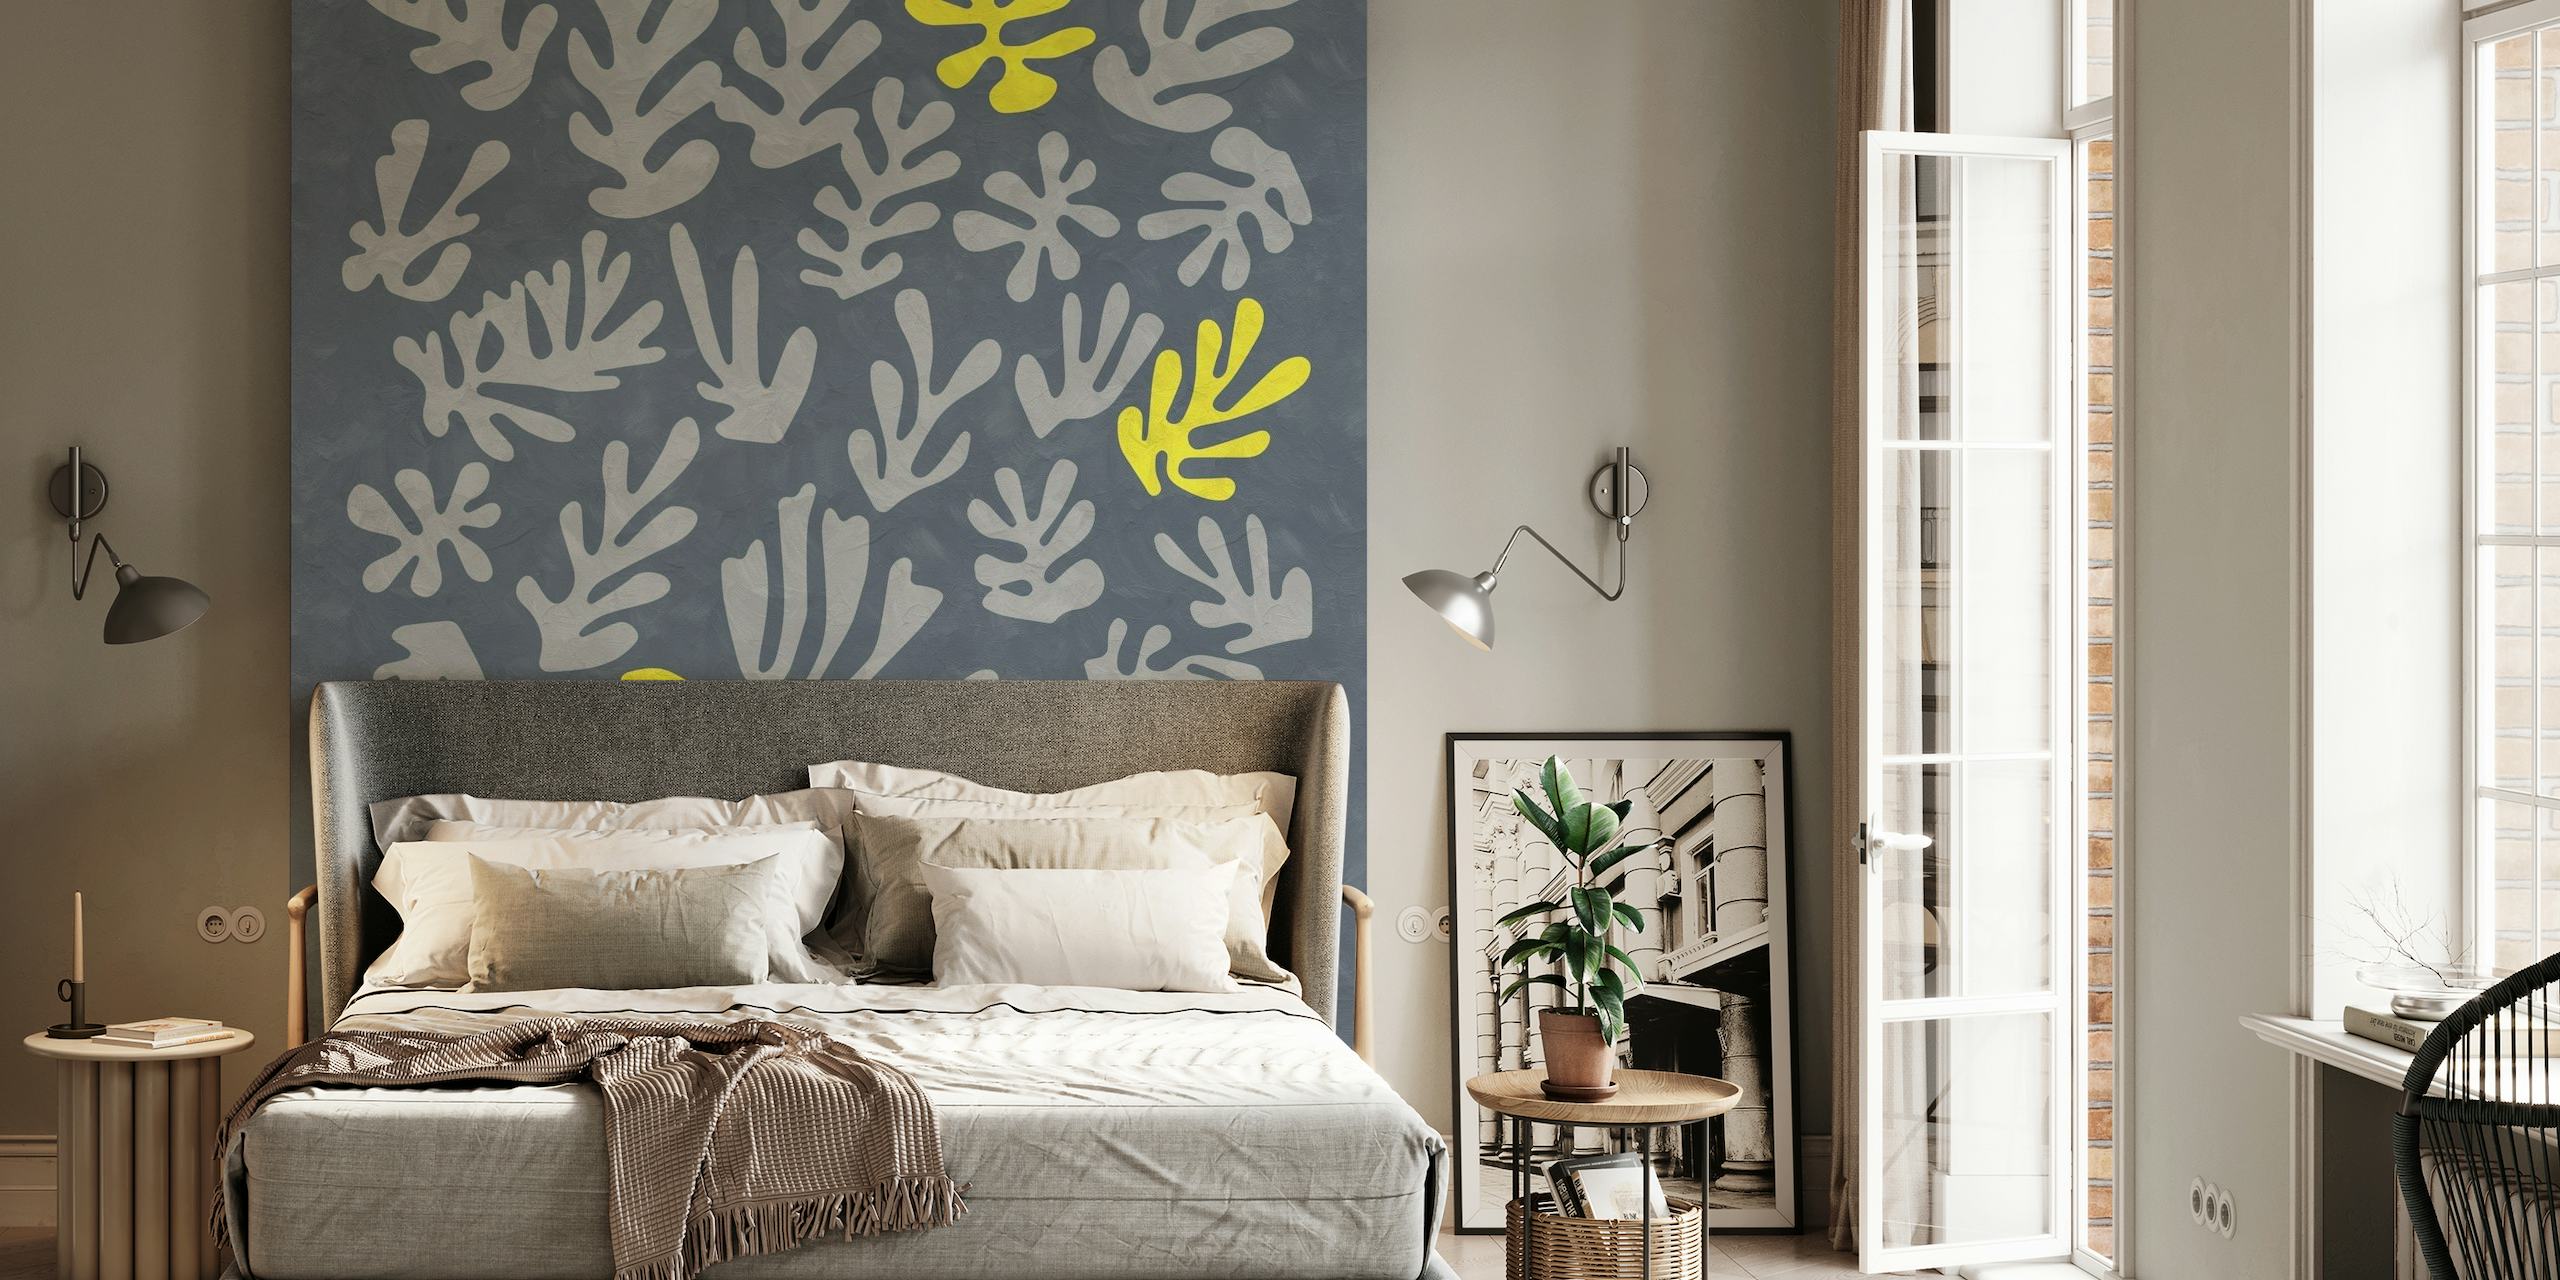 Abstract botanical yellow Matisse-inspired pattern on a grey background wall mural